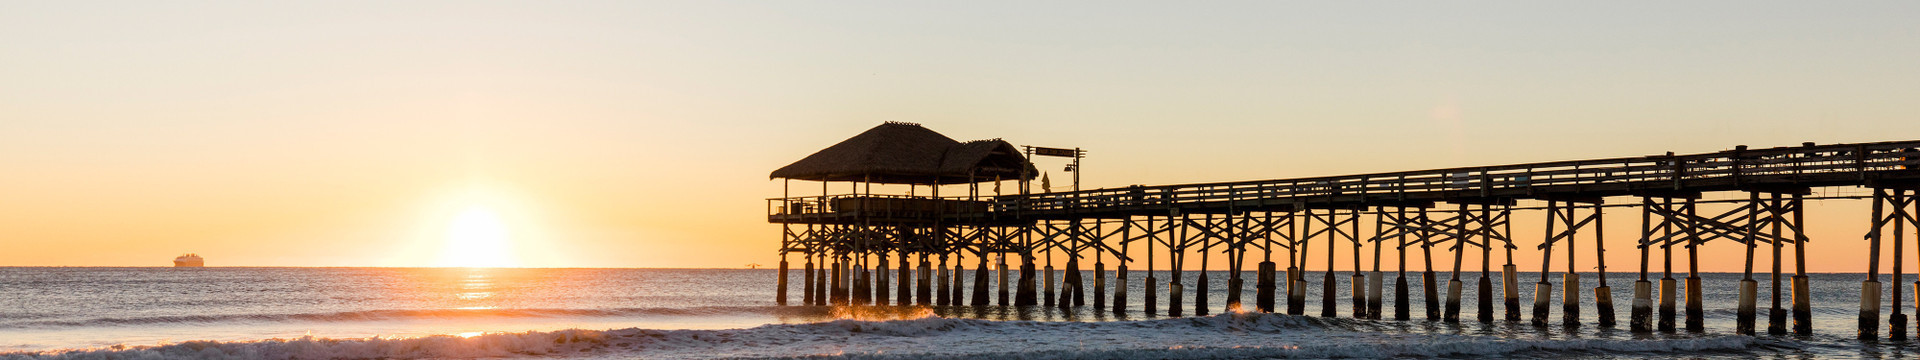 Westgate Travel Club | Ocean Pier by the Sunset